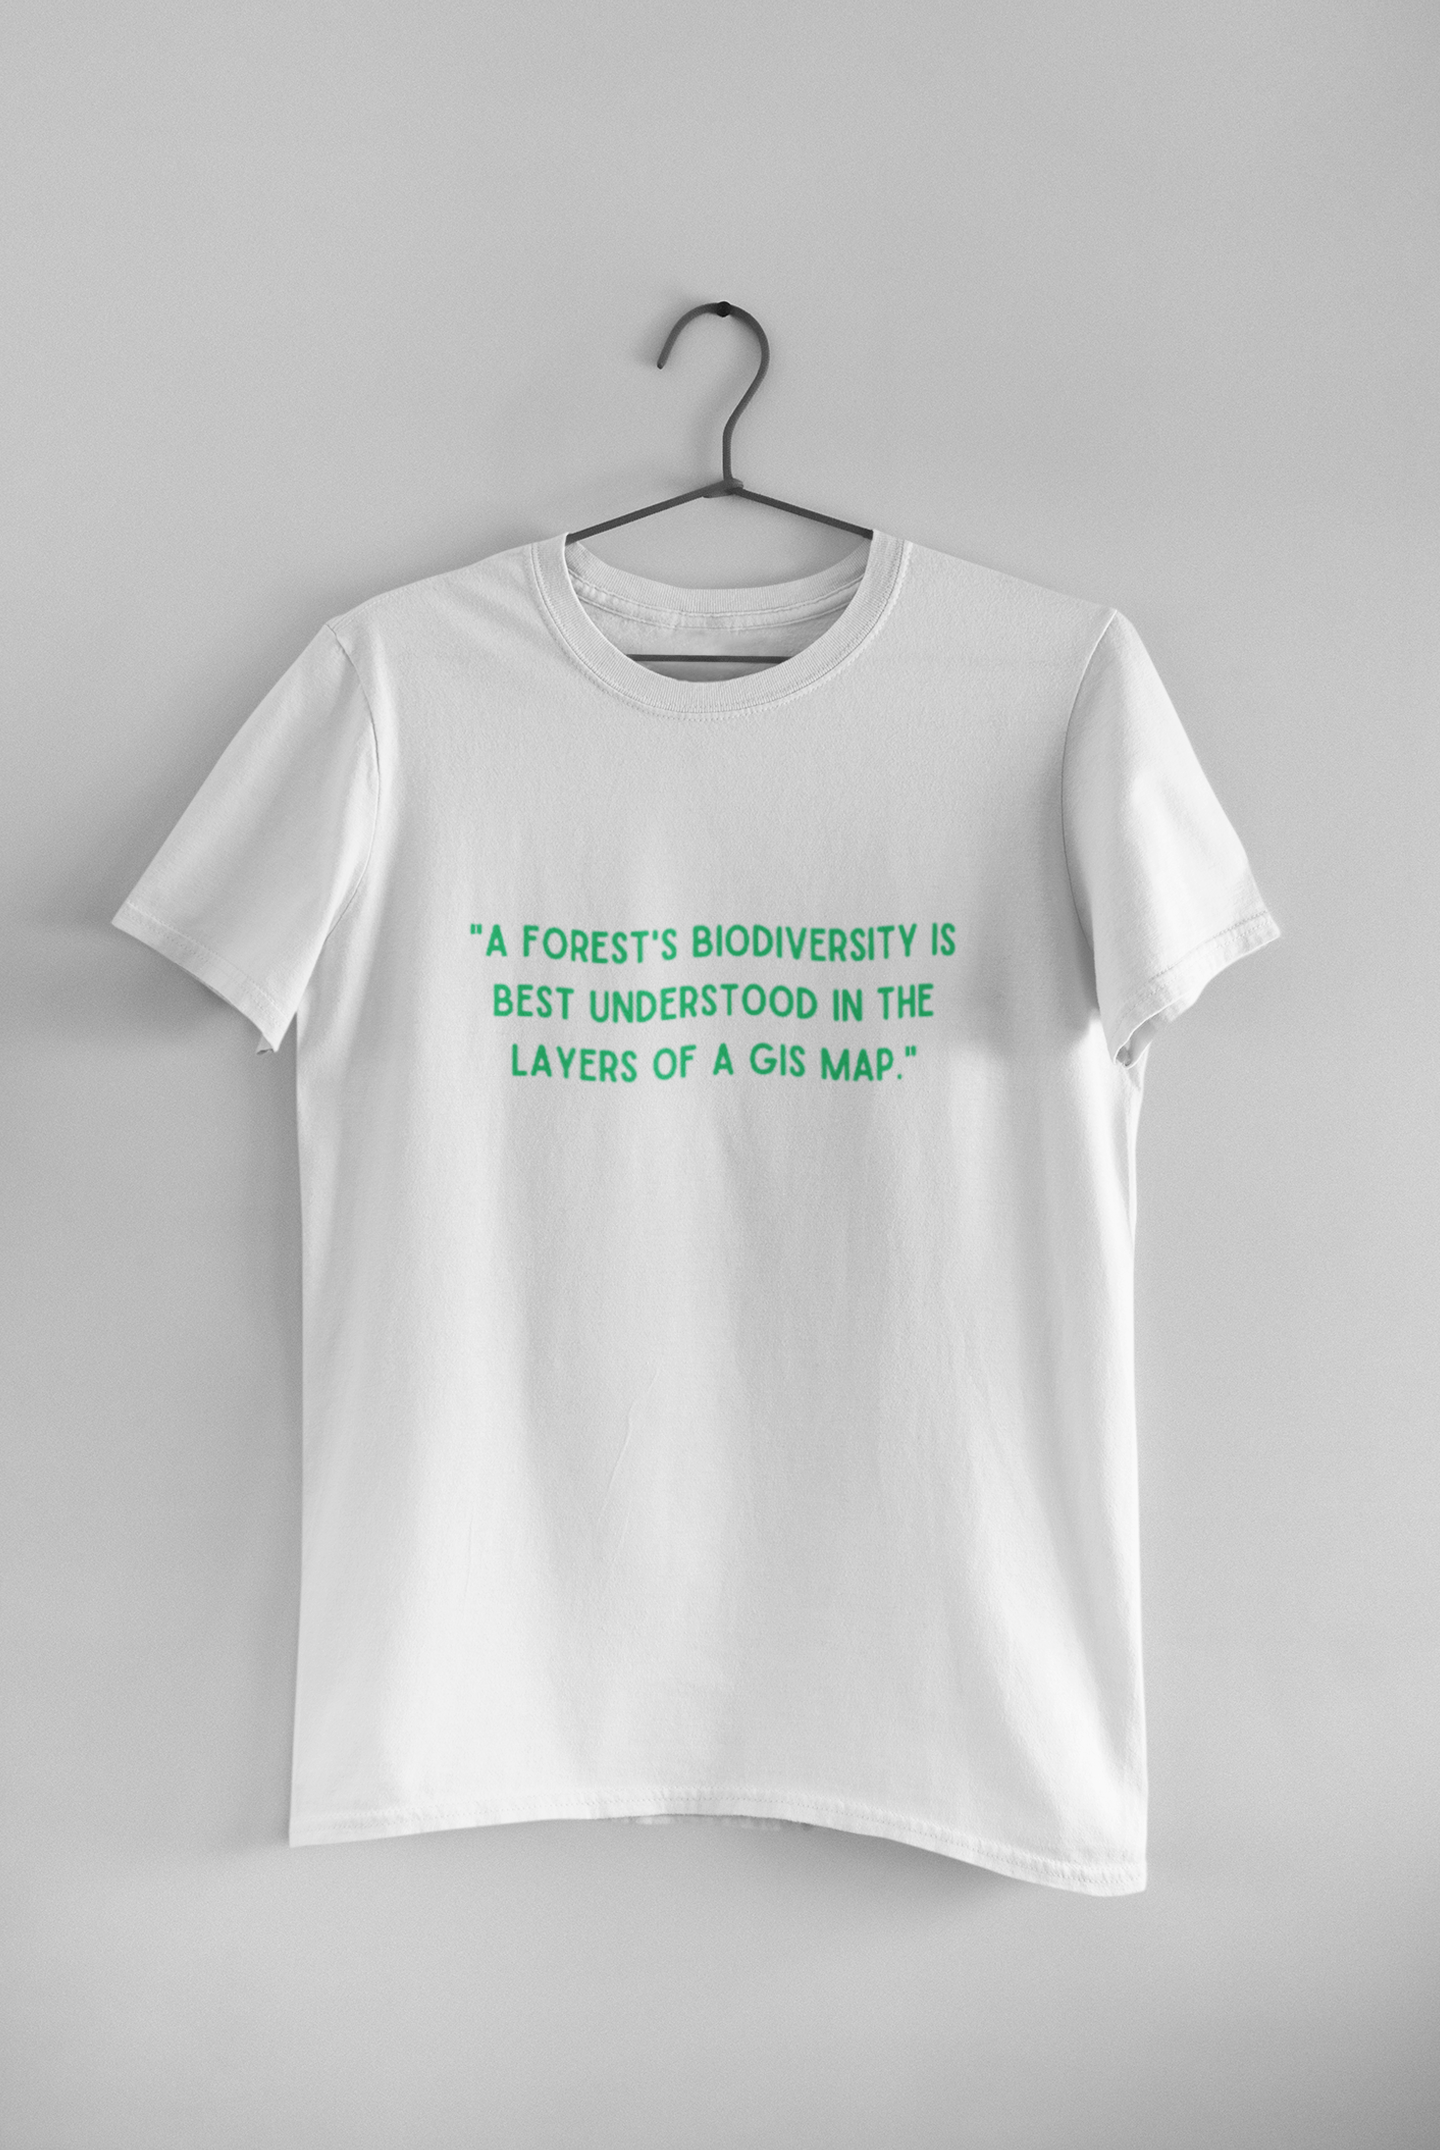 Layer of GIS map T SHIRT